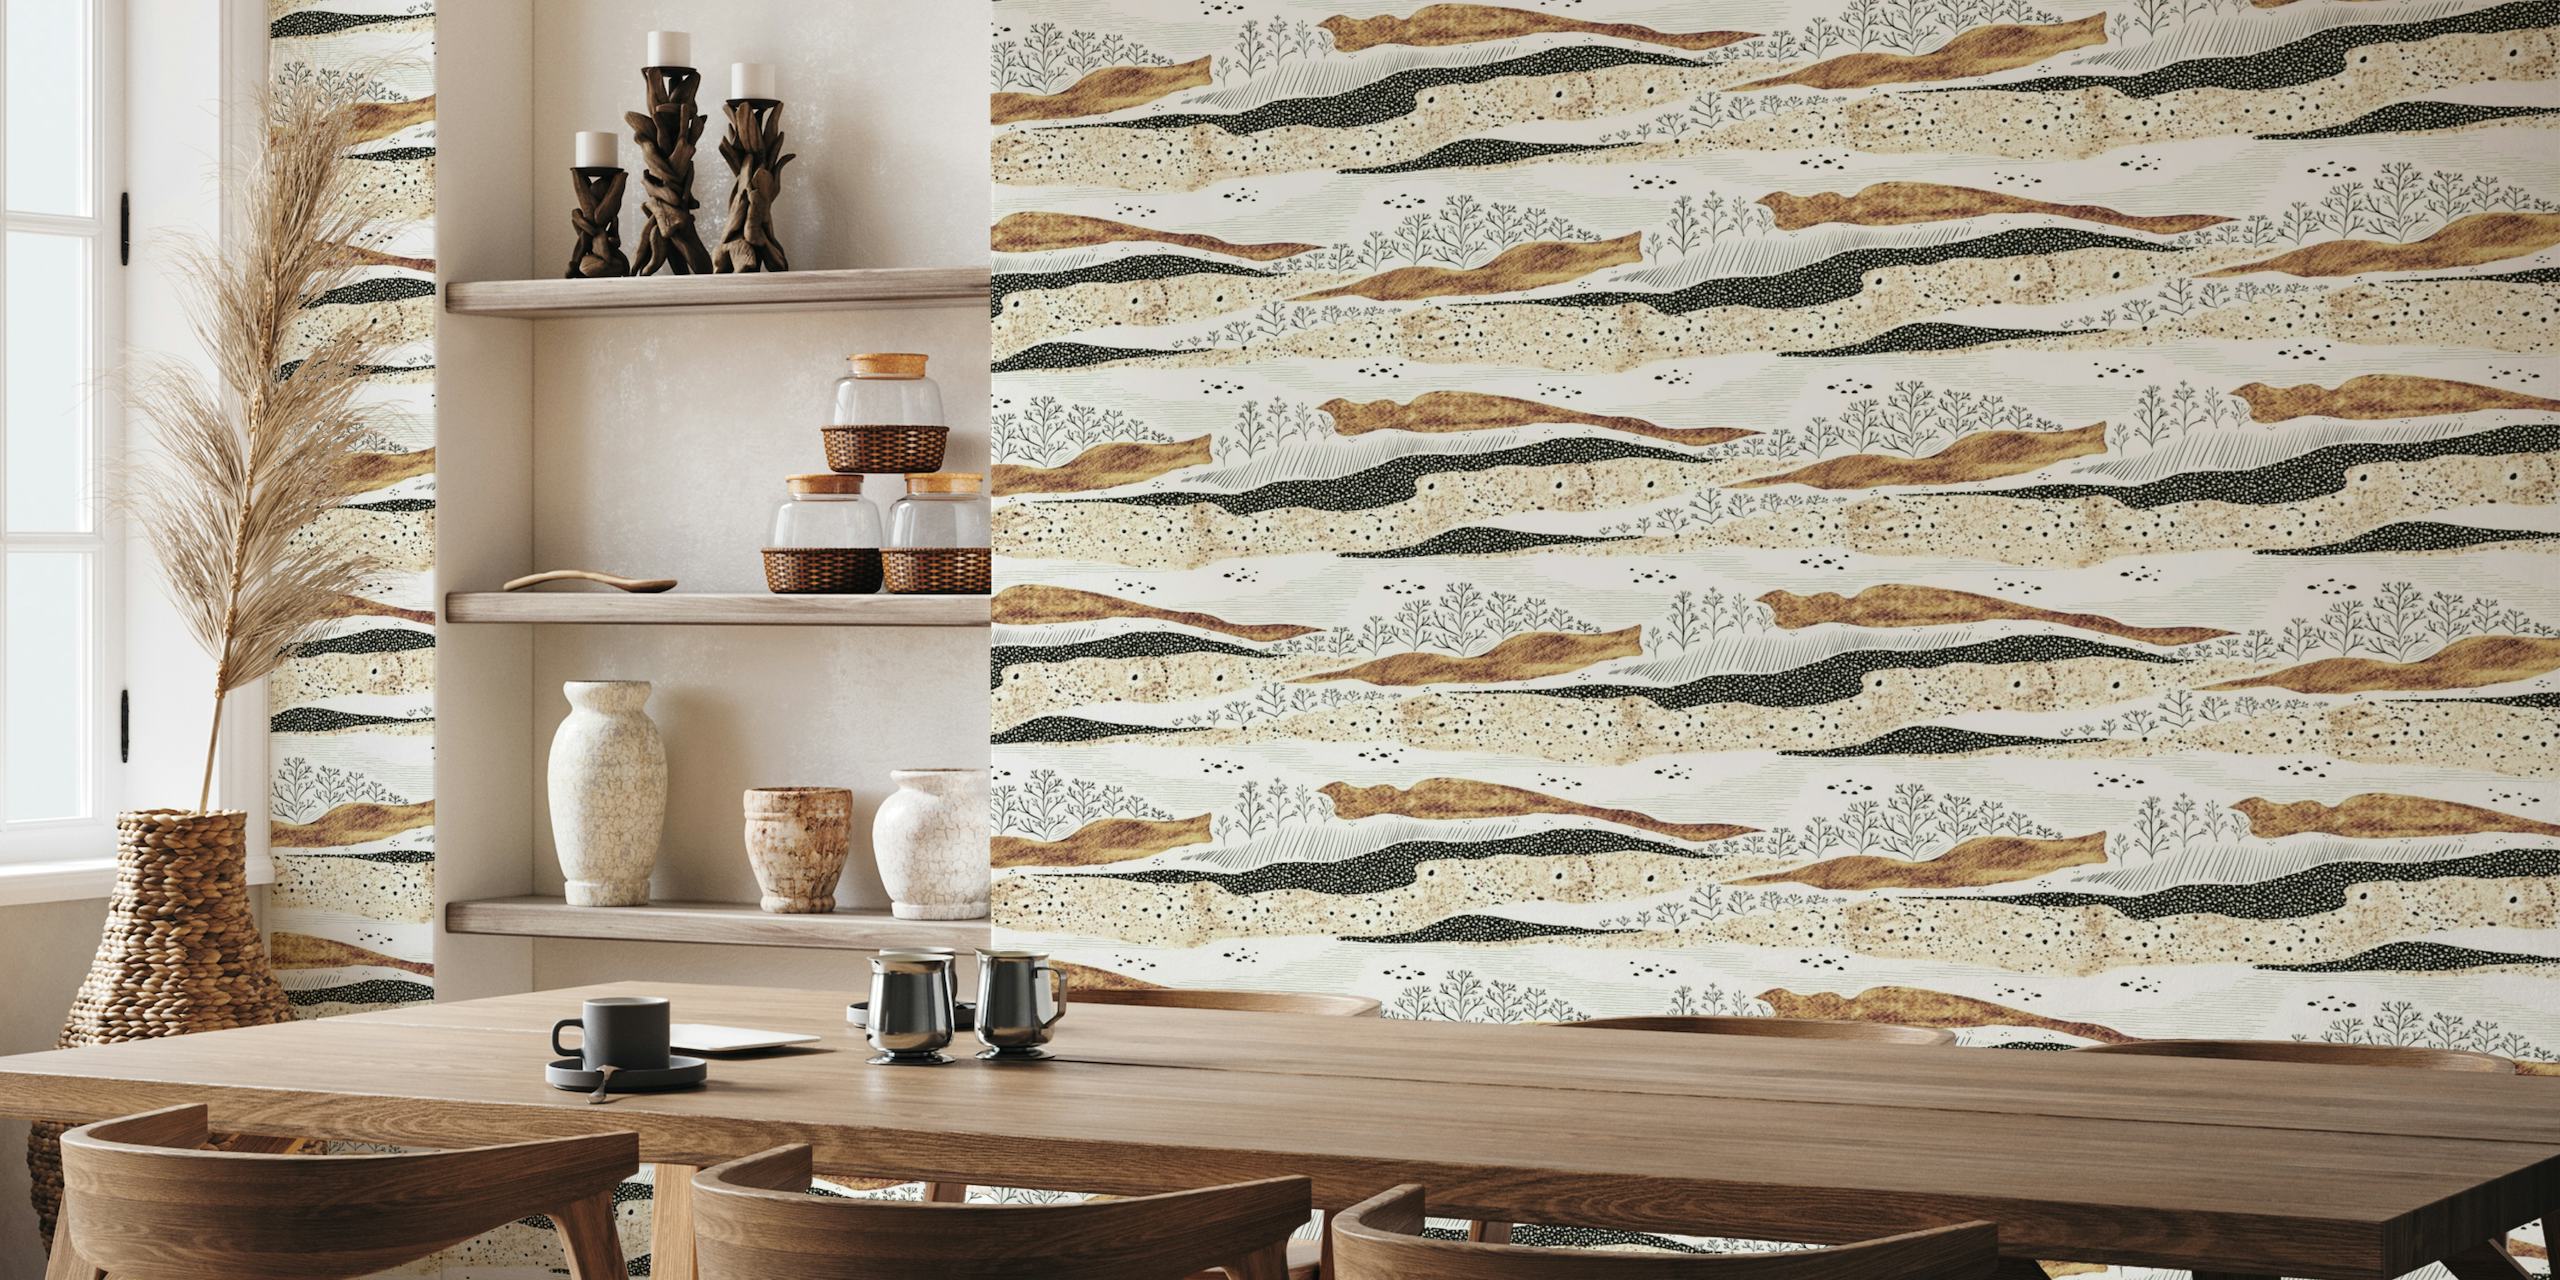 Abstract desert-inspired wall mural with wavy patterns and neutral tones.